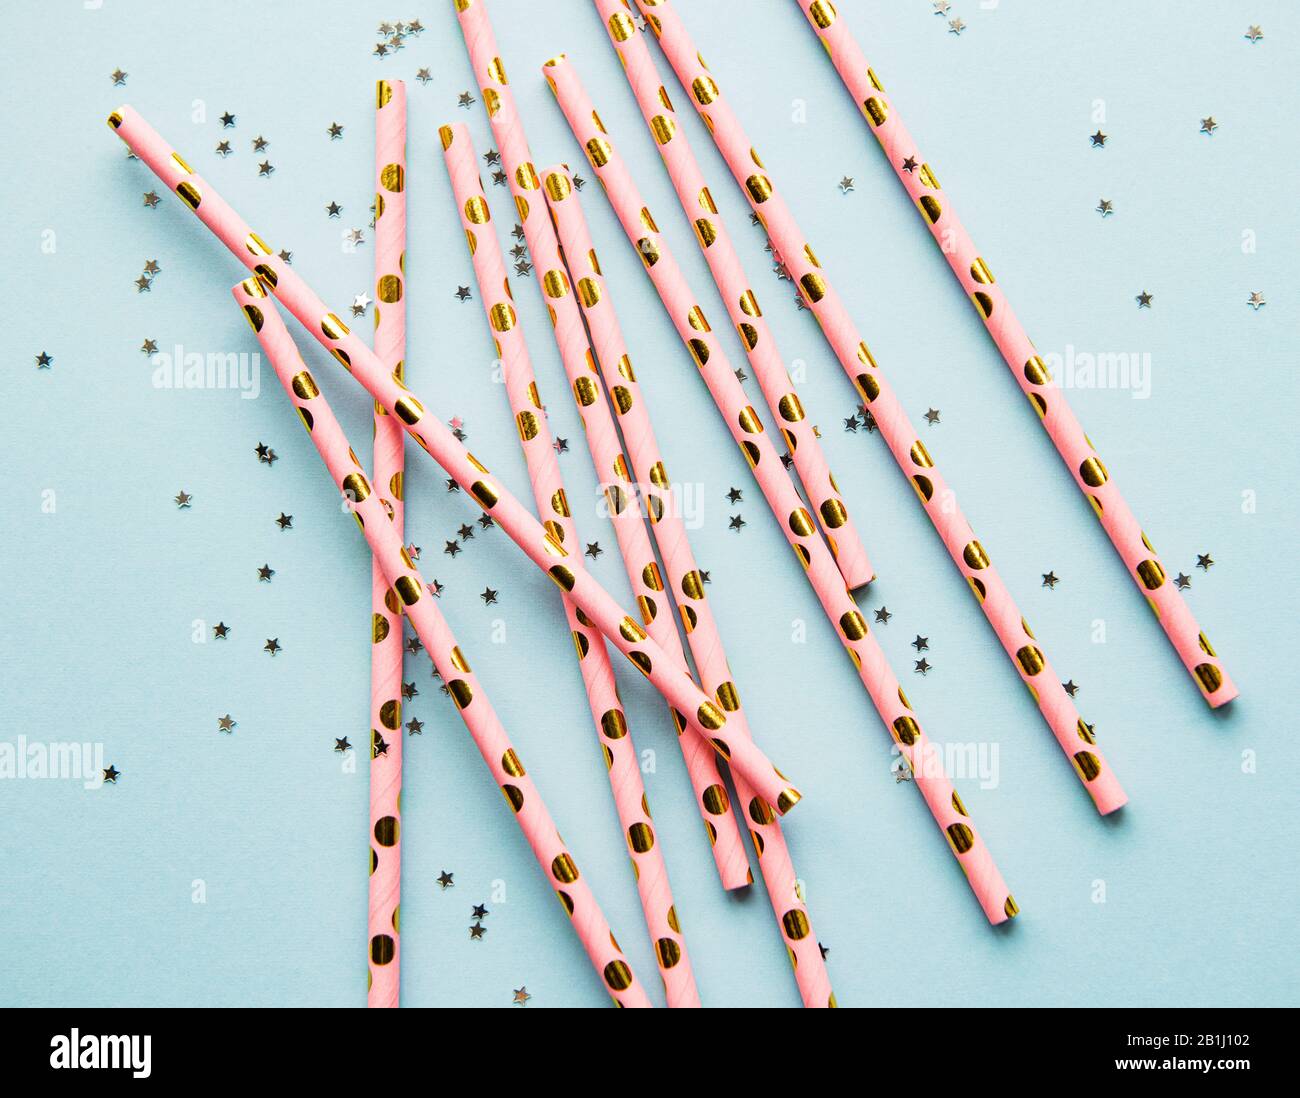 Drinking straws for party and confetti on blue background with copy space. Top view of colorful paper disposable eco-friendly straws for summer cockta Stock Photo